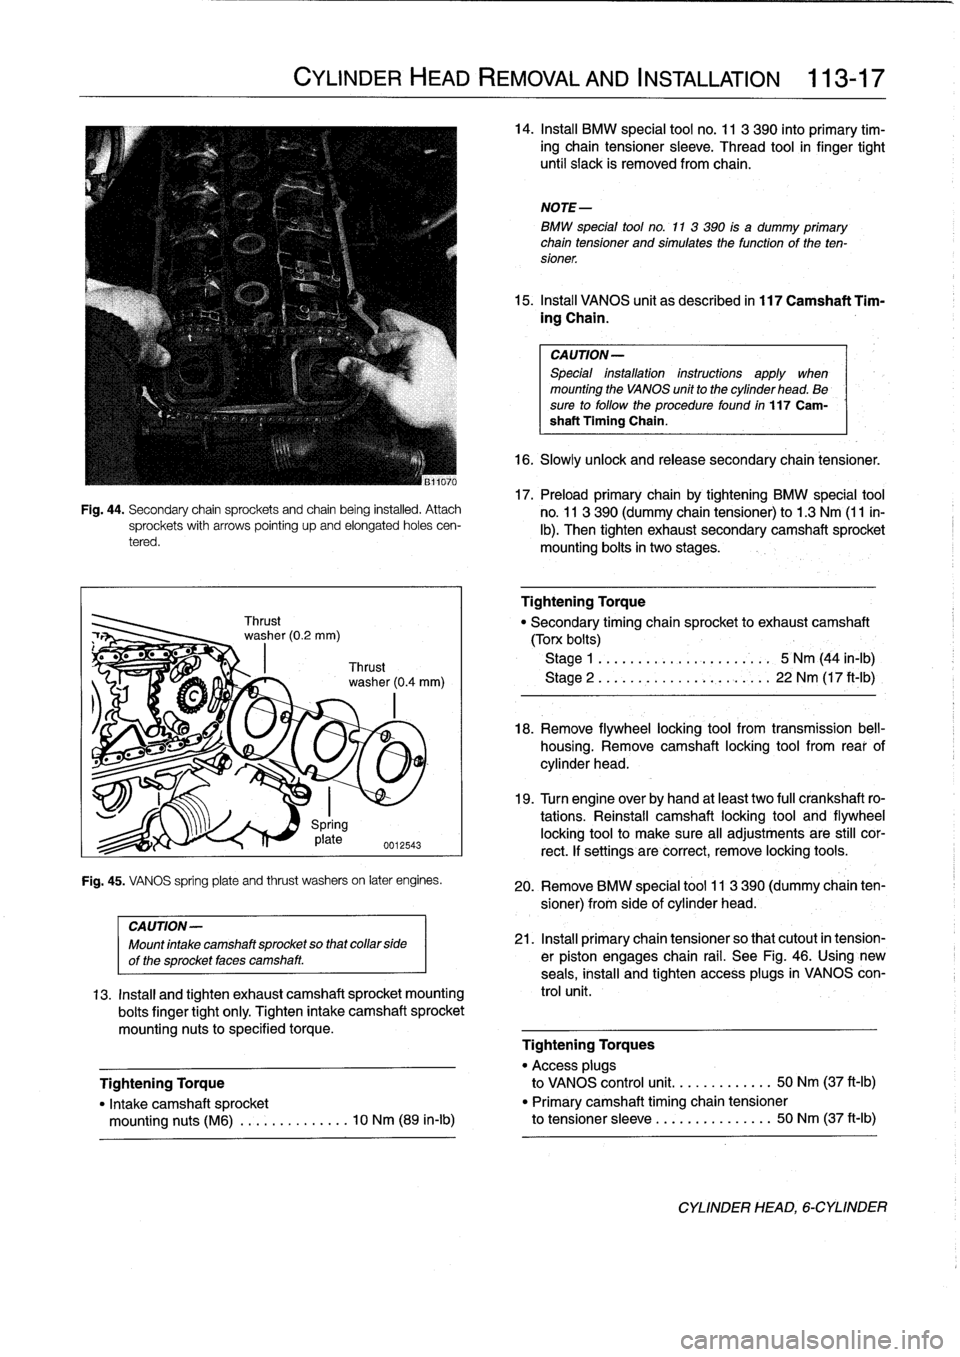 BMW M3 1993 E36 Workshop Manual 
Fig
.
44
.
Secondary
chain
sprockets
and
chain
being
installed
.
Attachsprockets
with
arrows
pointing
upand
elongated
holes
cen-
tered
.

CYLINDER
HEAD
REMOVAL
AND
INSTALLATION

	

113-17

Spring
17
